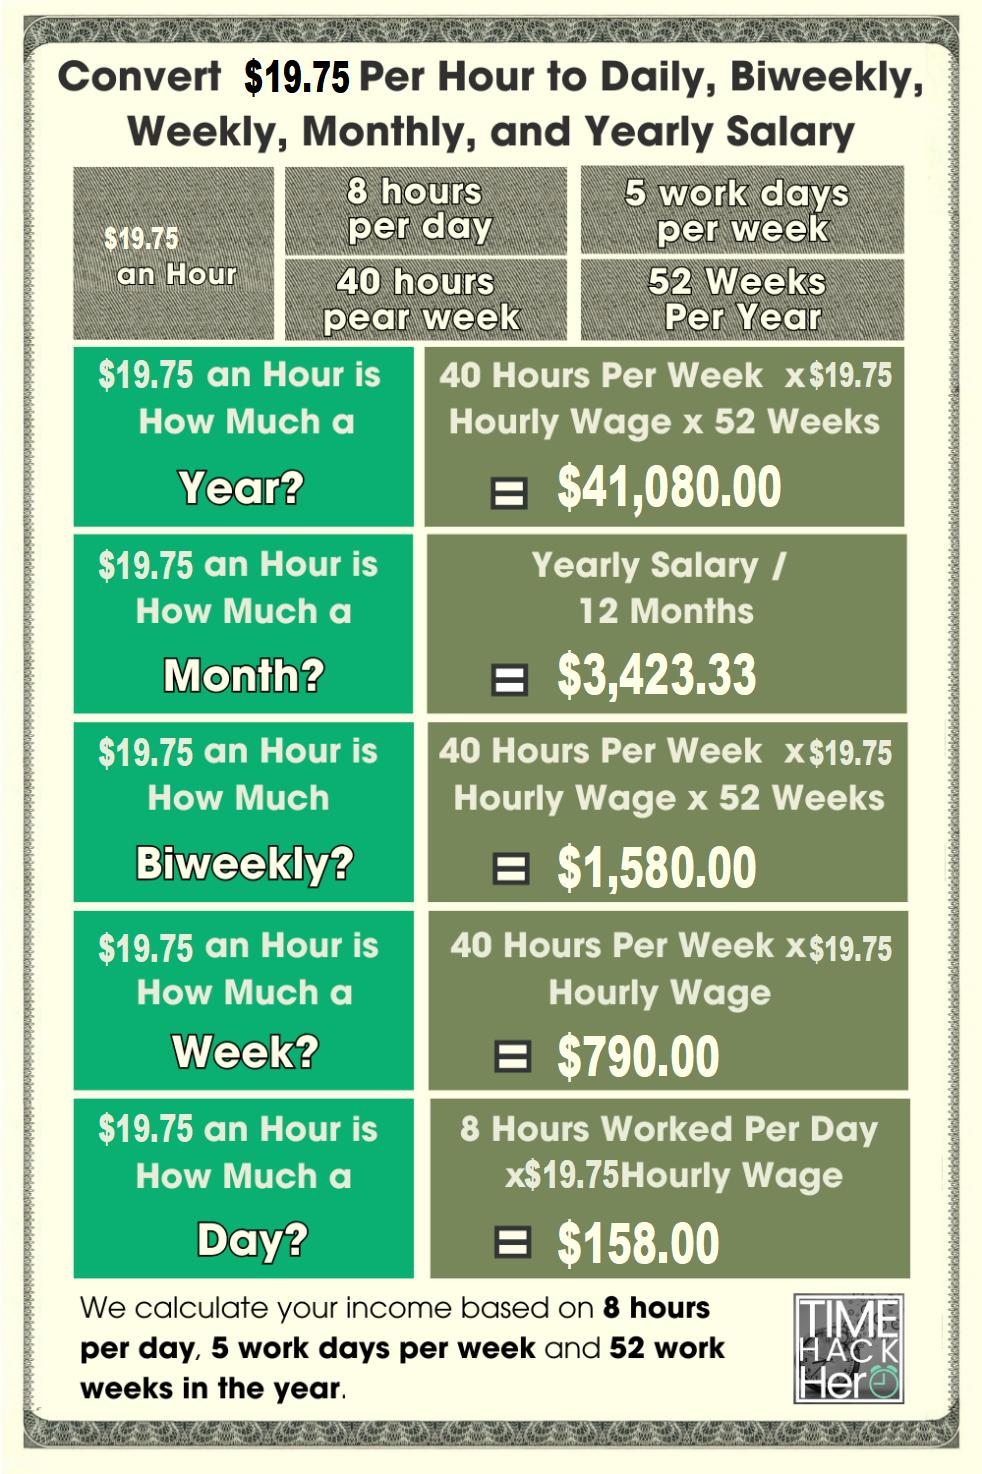 Convert $19.75 Per Hour to Weekly, Monthly, and Yearly Salary